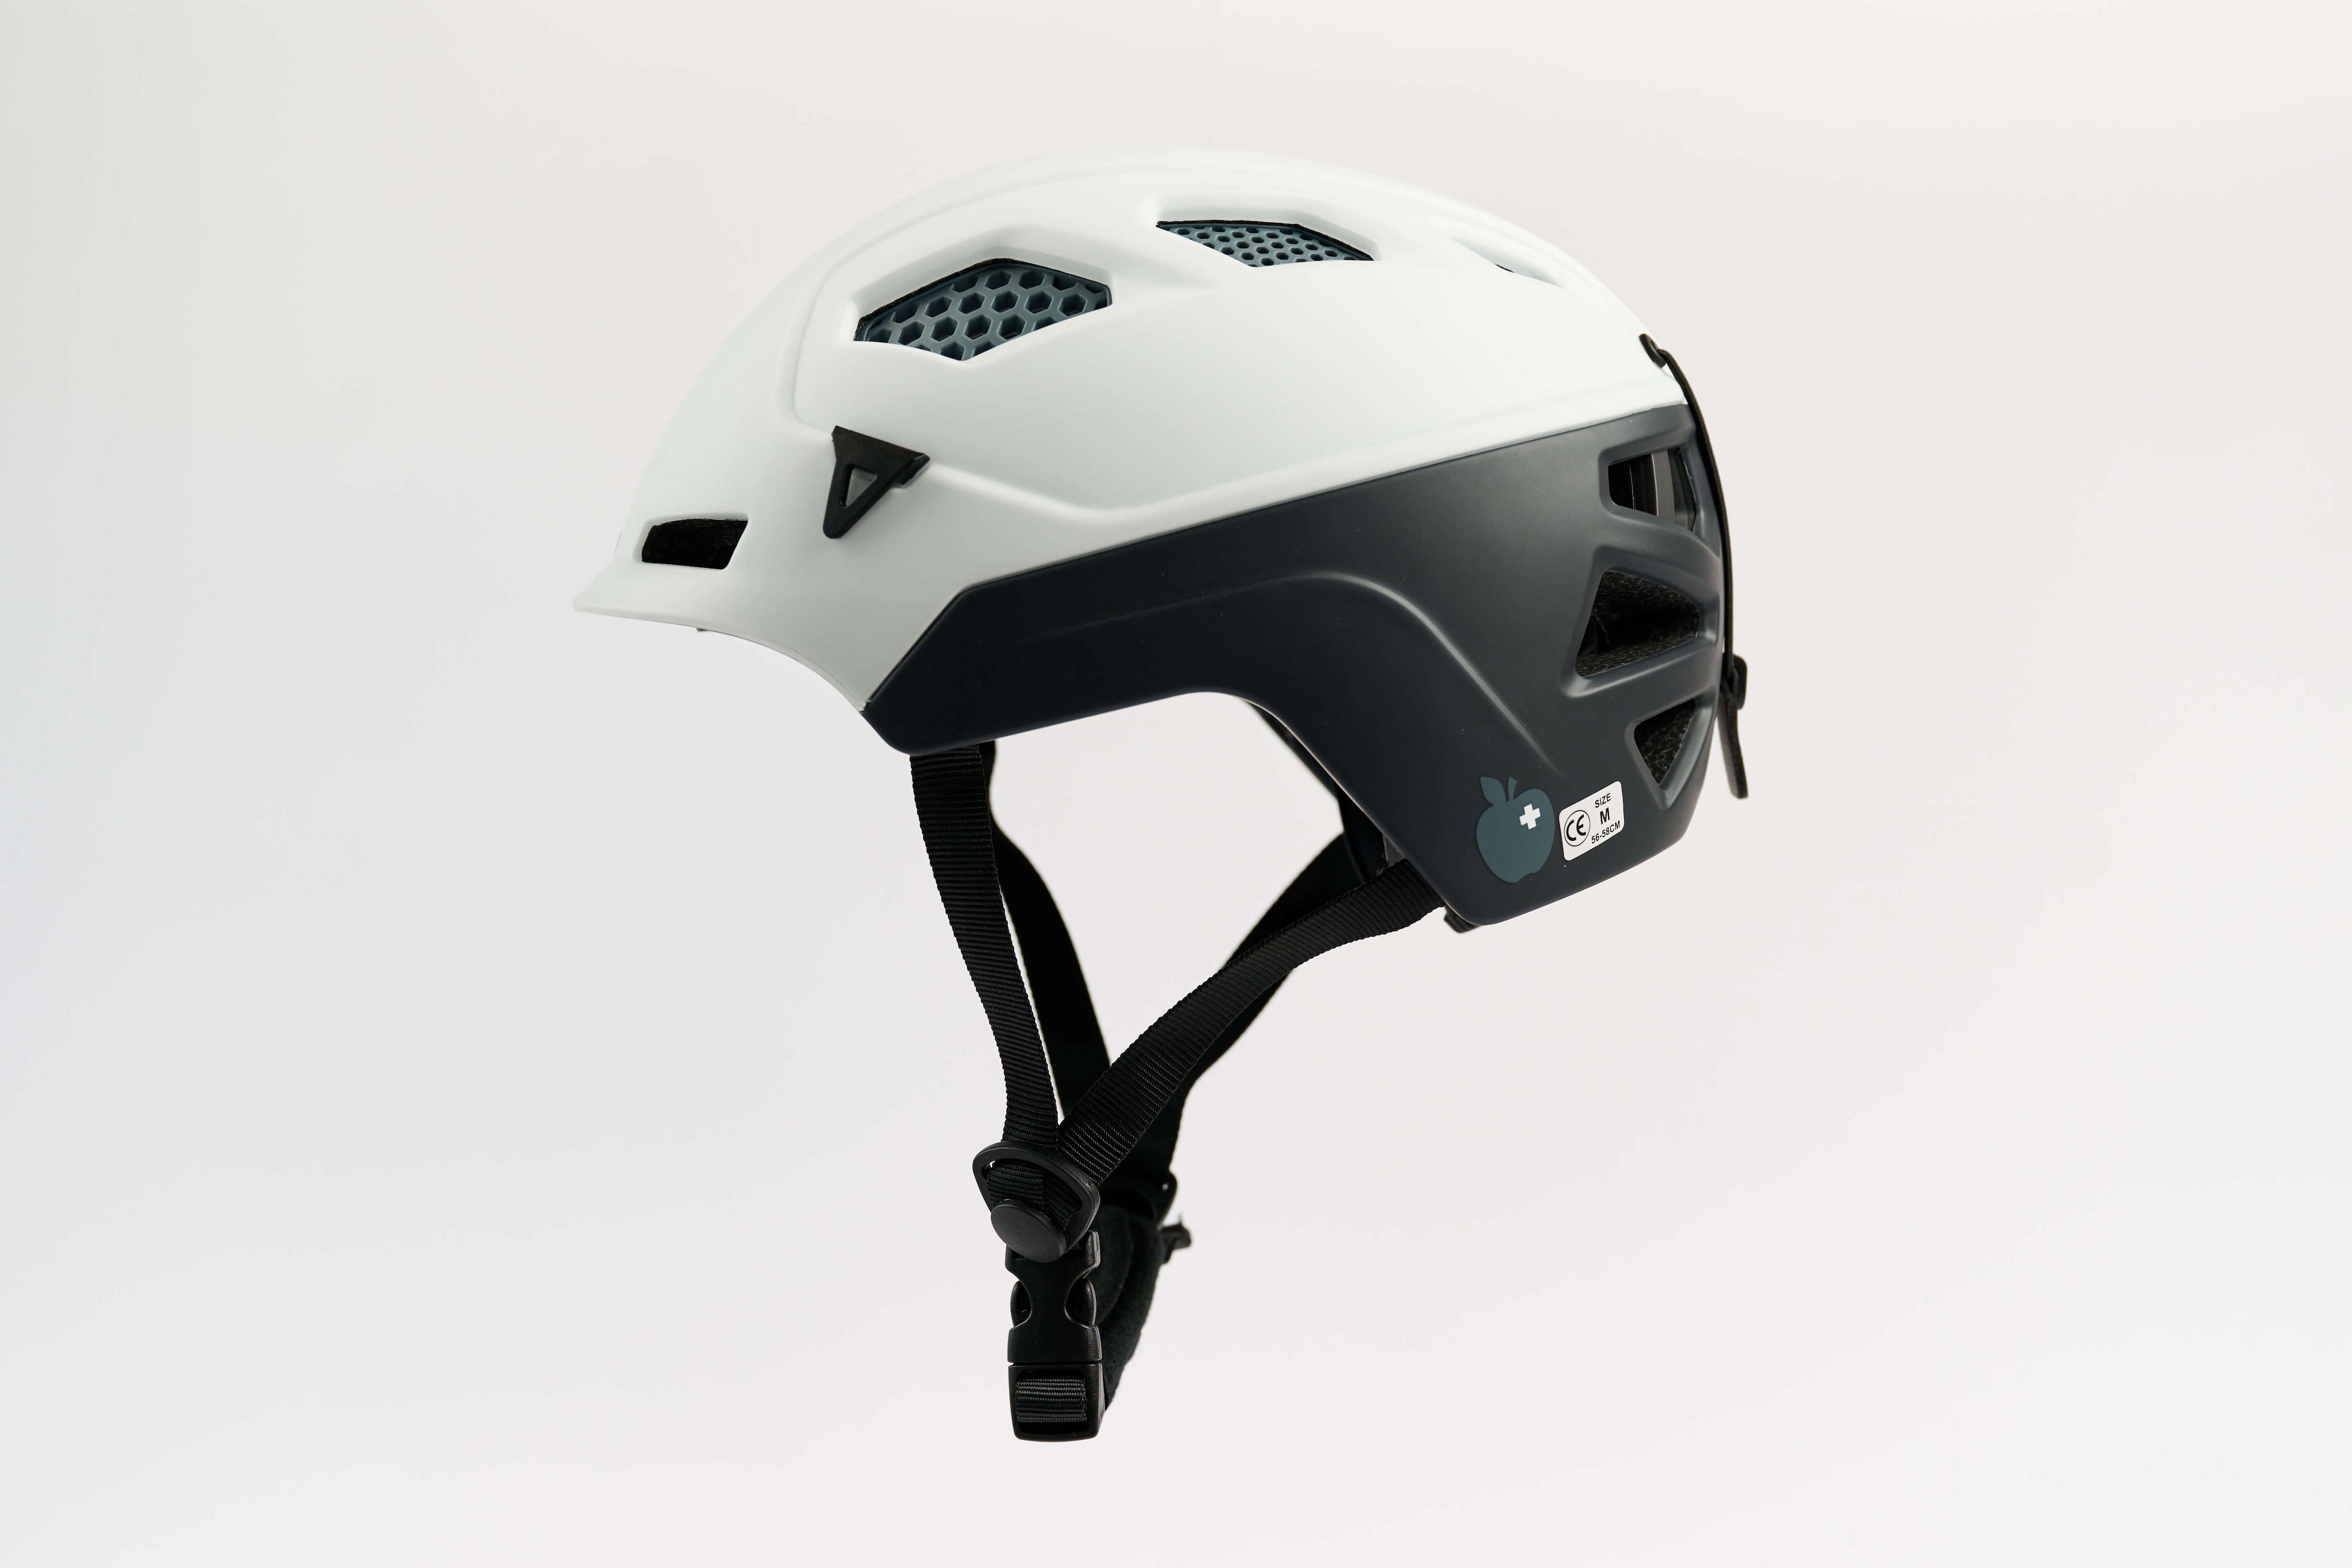 Stay confident on the slopes with the reliable Movement 3Tech Alpi helmet by your side.